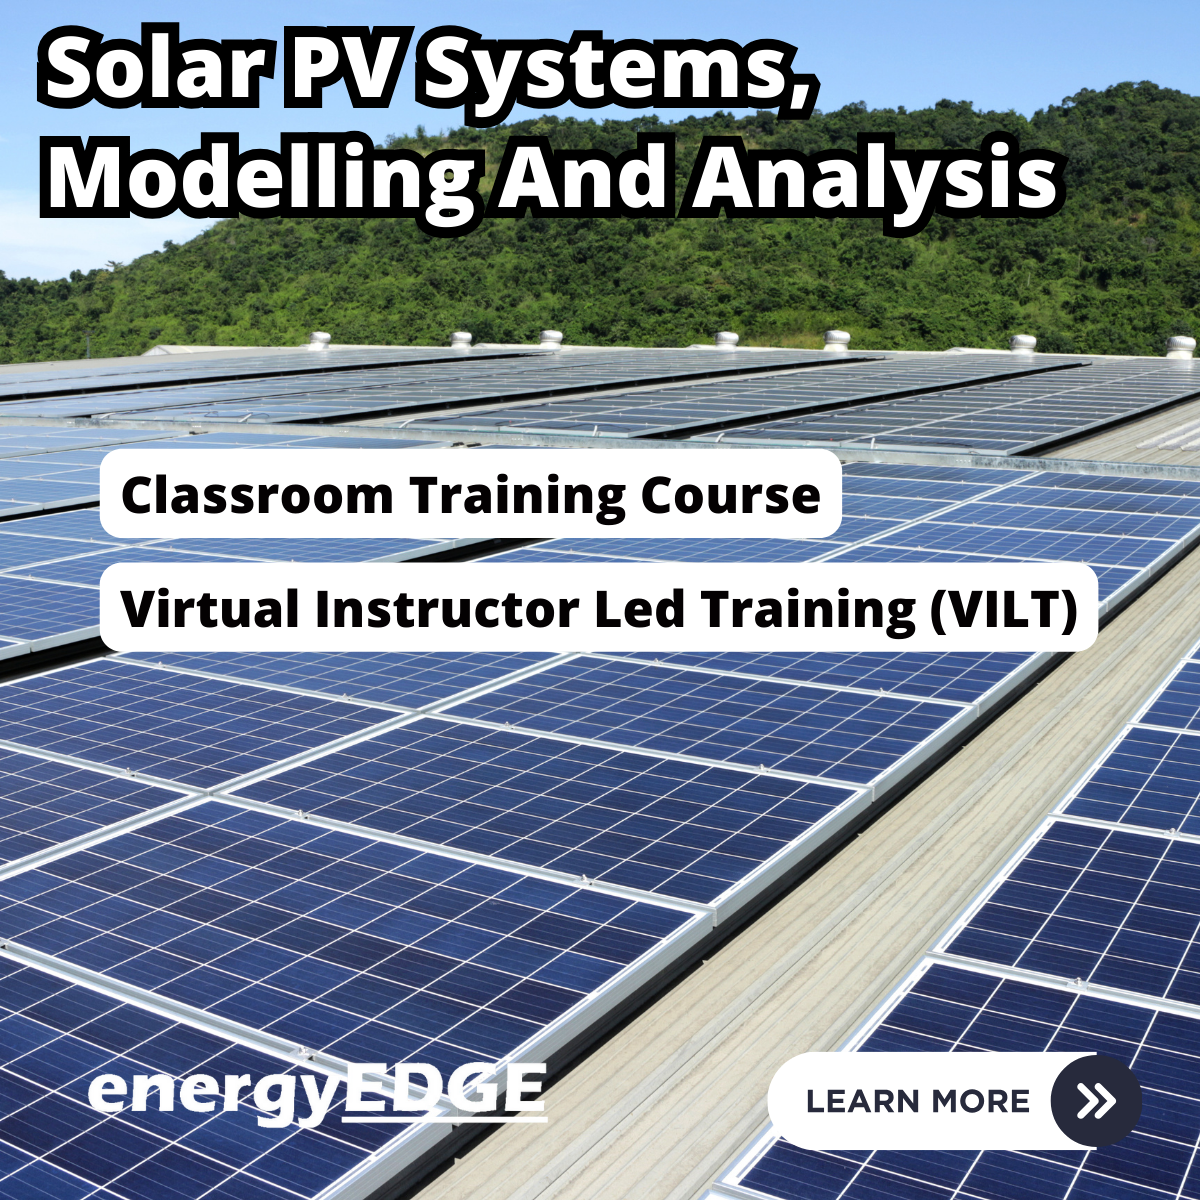 Solar PV Systems, Modelling and Analysis – Master the Technology of Solar PV from Cells to Systems